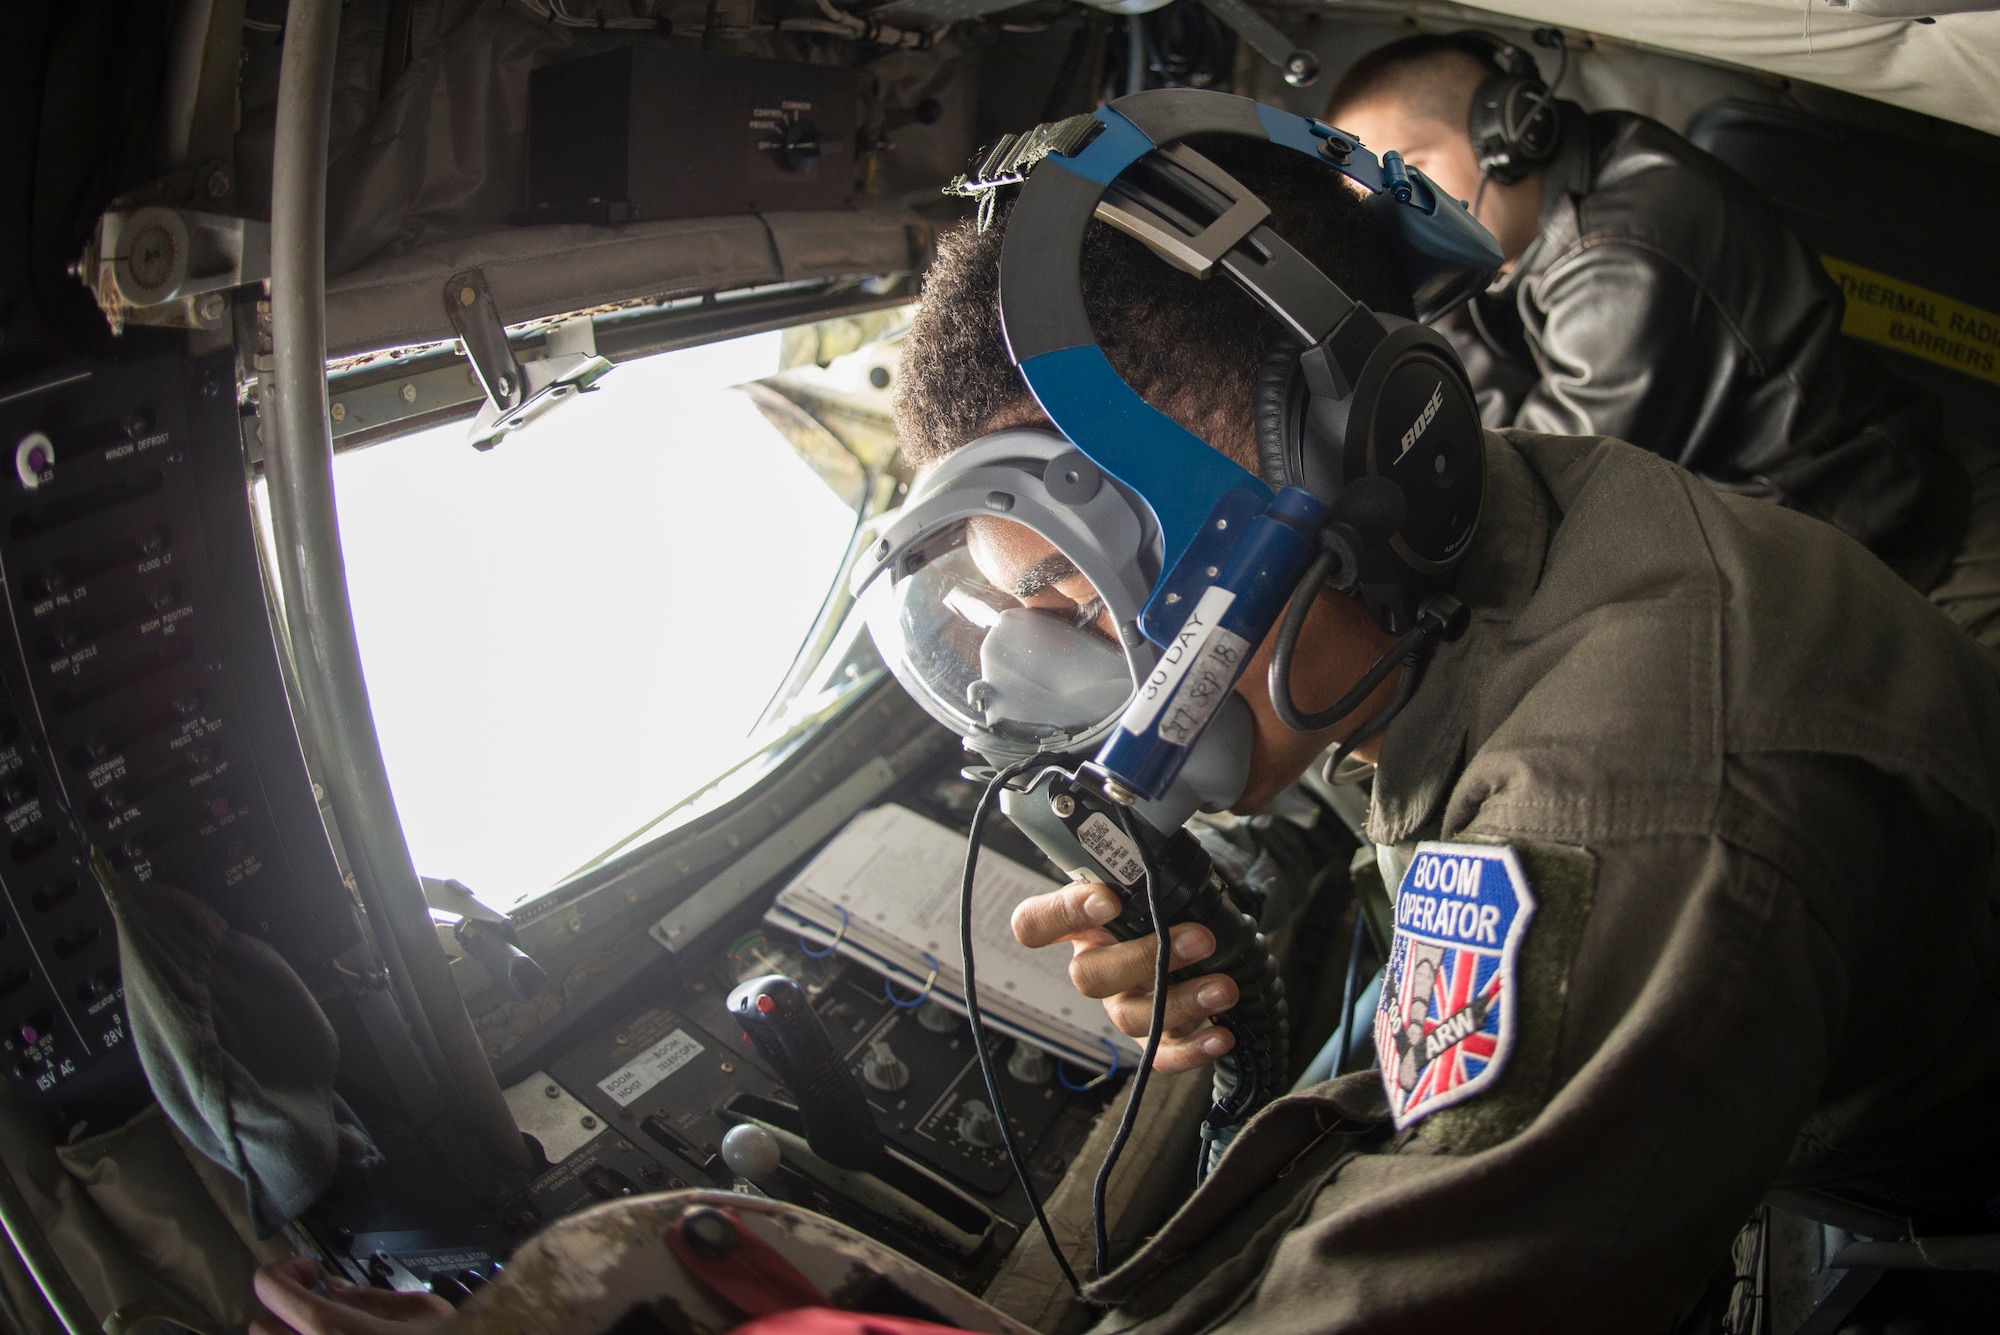 U.S. Air Force Airman 1st Class Noah Ford, 351st Air Refueling Squadron boom operator, tests an oxygen mask before take-off aboard a KC-135 Stratotanker prior to a flight at RAF Mildenhall, England, Sept. 13, 2018. The 100th ARW supported training with a U.S. Air Force B-52 and Romanian Air Force F-16s in the airspace above Romania.(U.S. Air Force photo by Tech. Sgt. Emerson Nuñez)